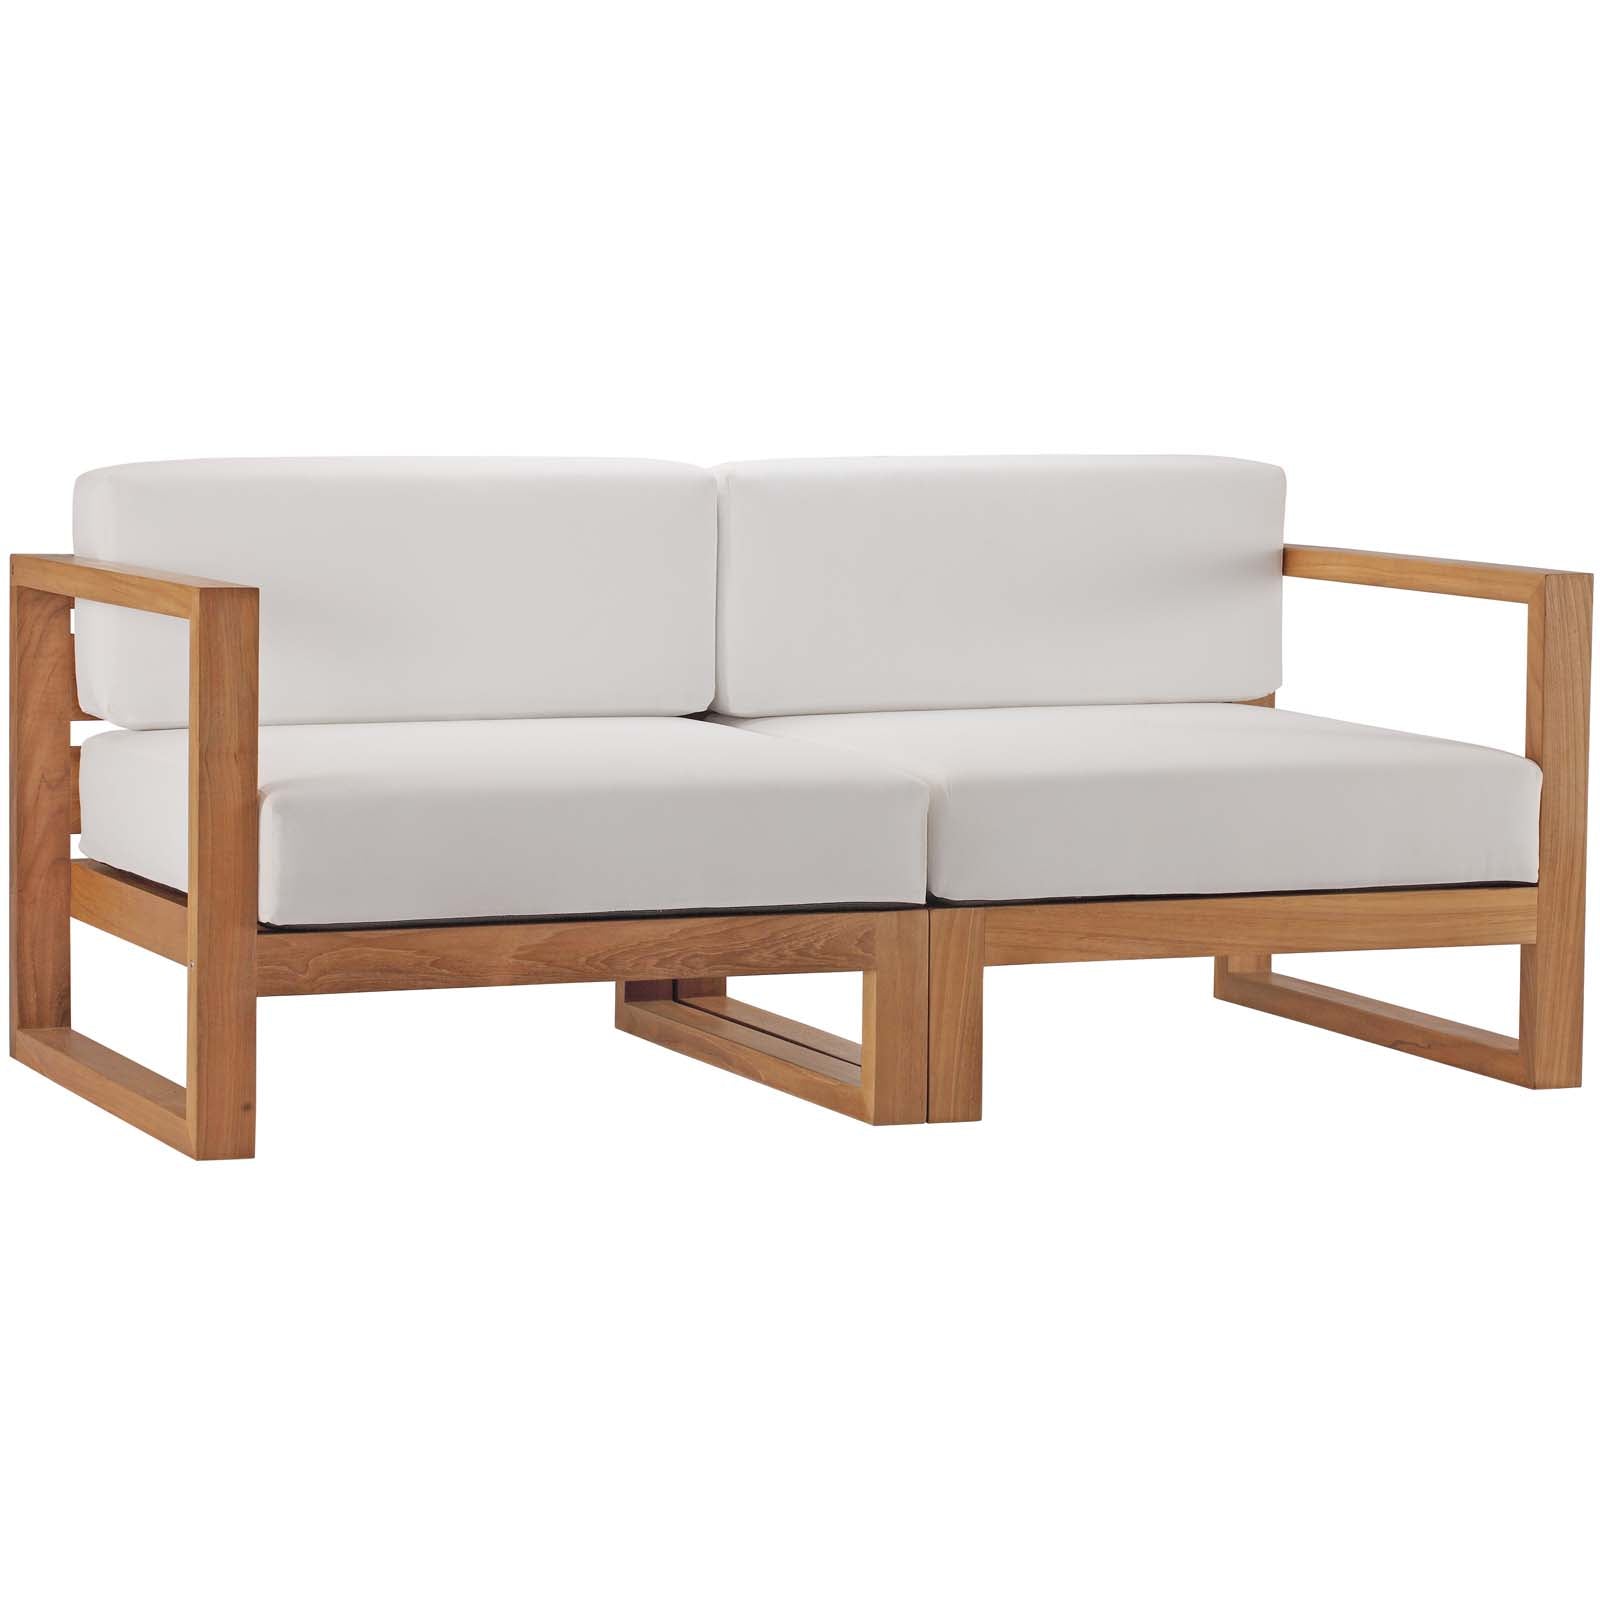 Modway Outdoor Conversation Sets - Upland Outdoor Patio Teak Wood 2 Piece Sectional Sofa Loveseat Natural White